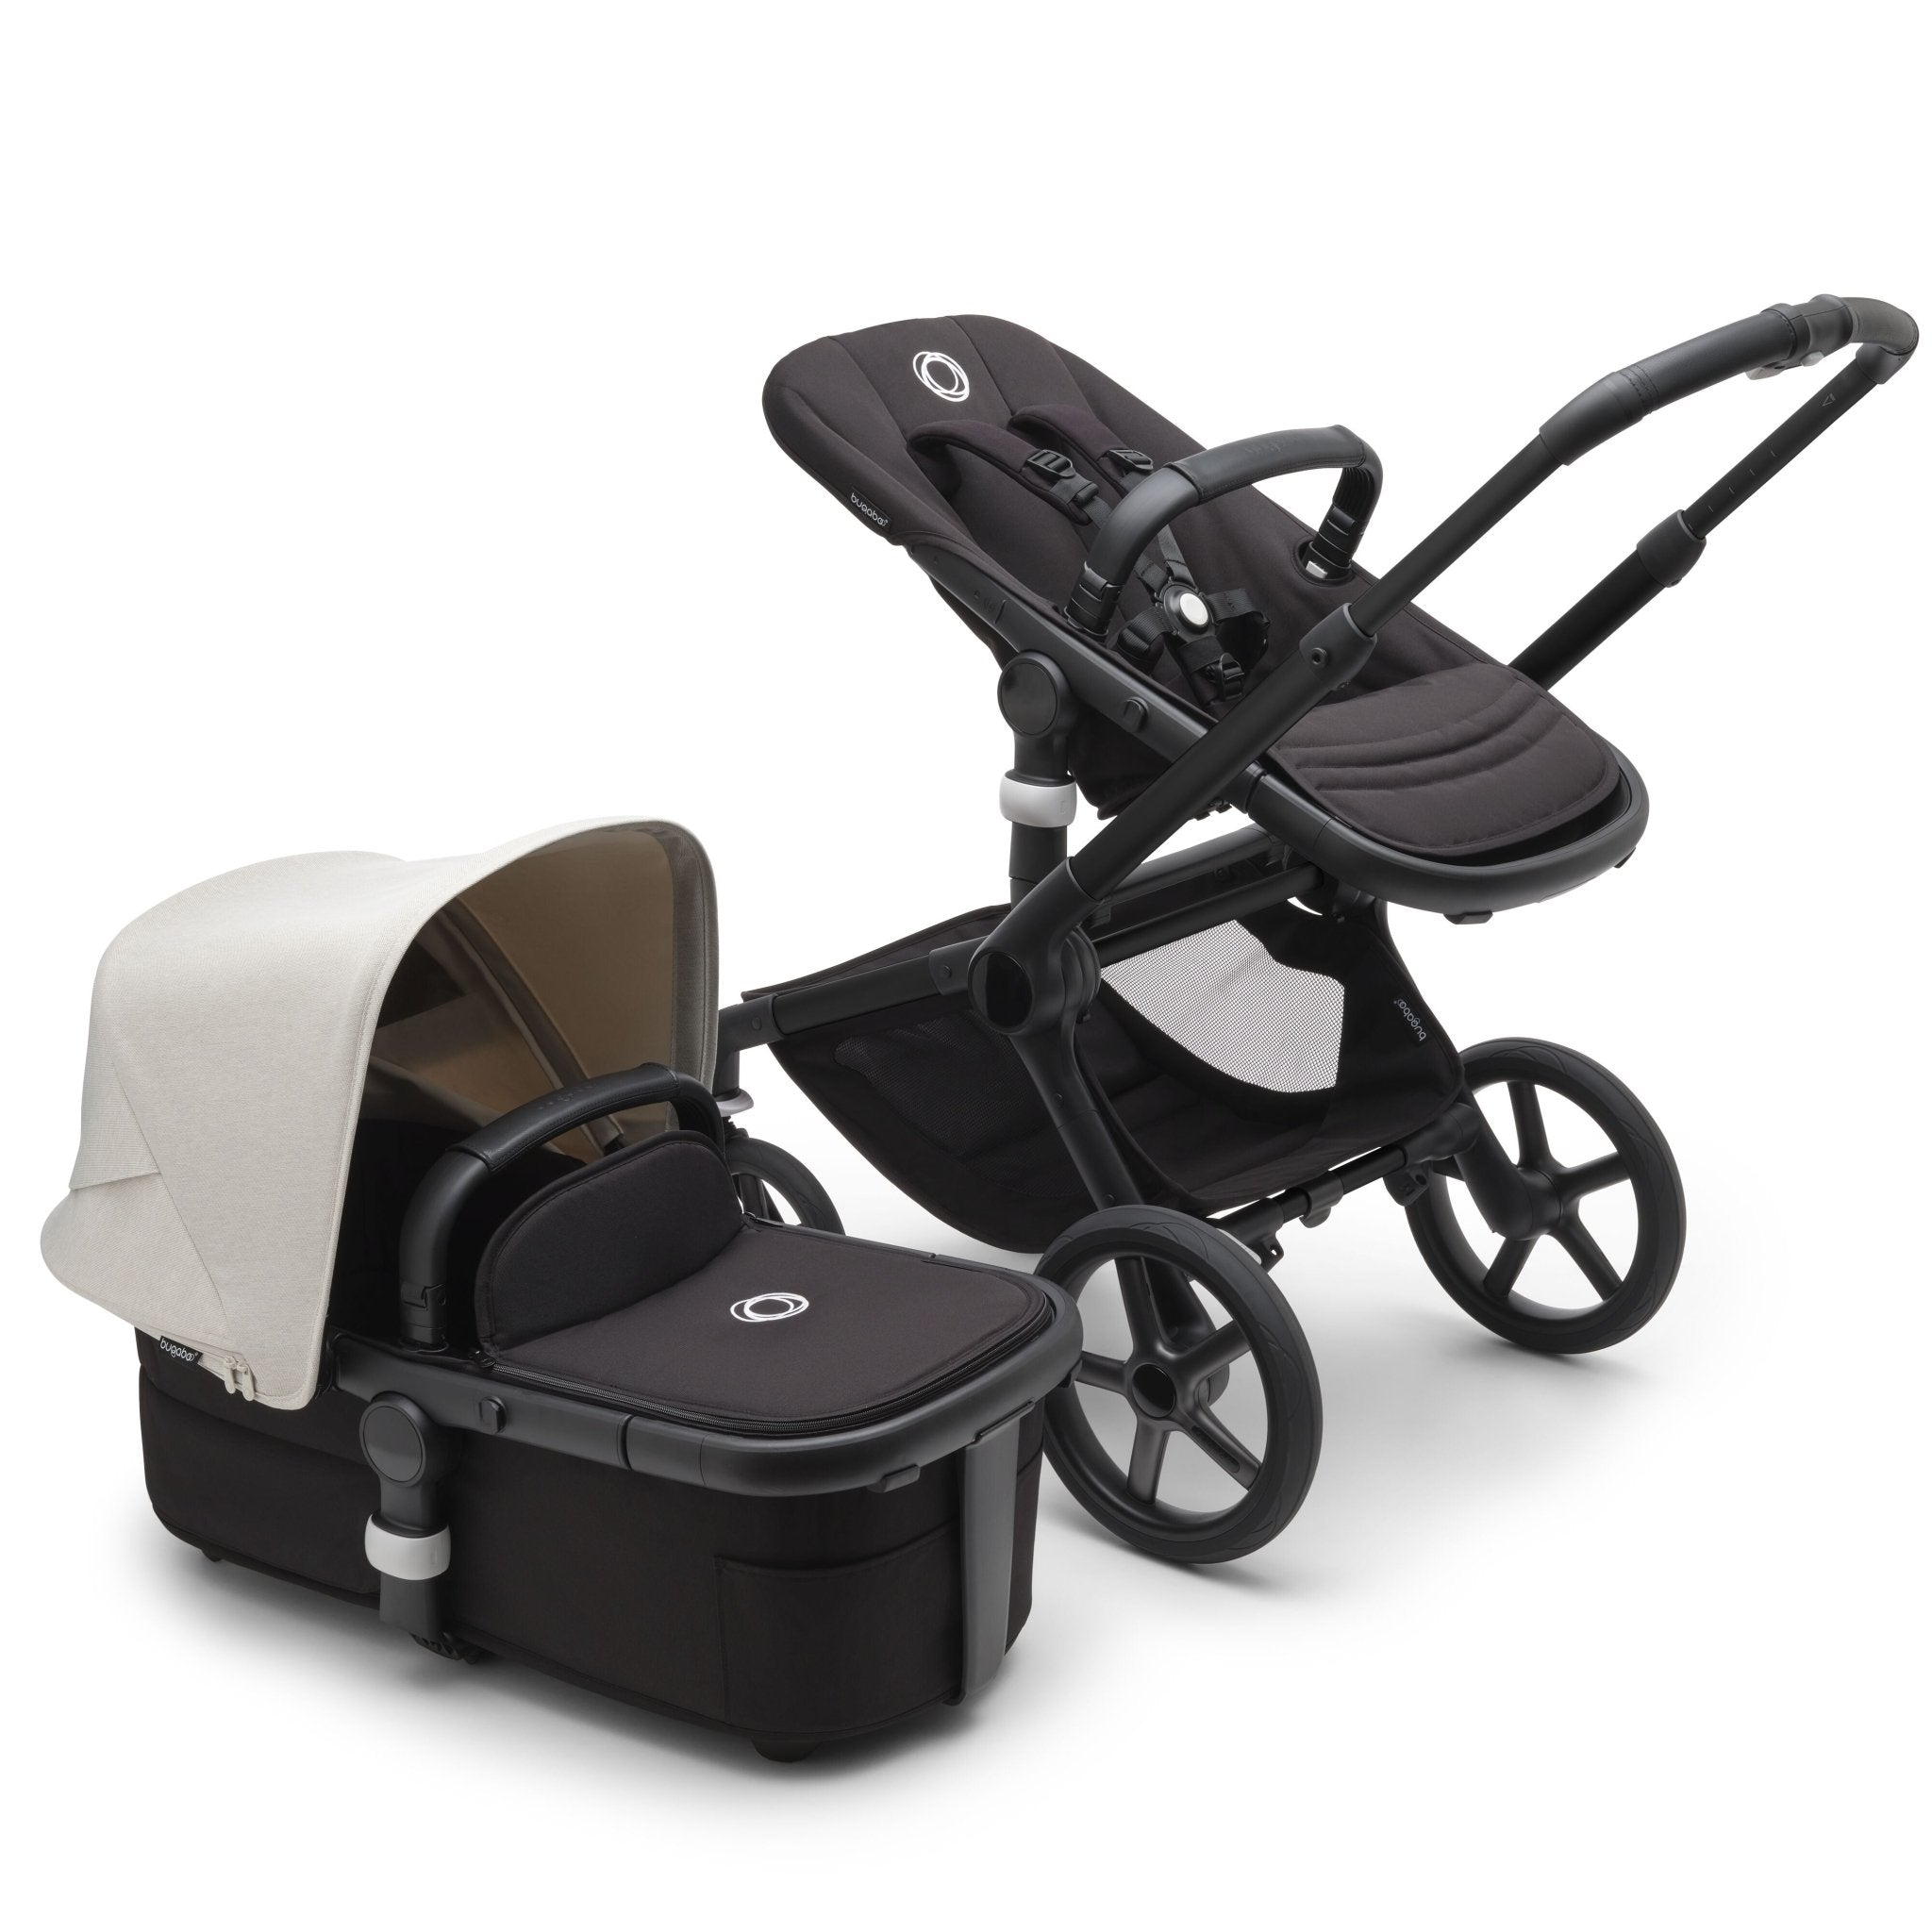 Bugaboo Fox 5 Complete Stroller - ANB Baby -8717447352990$1000 - $2000